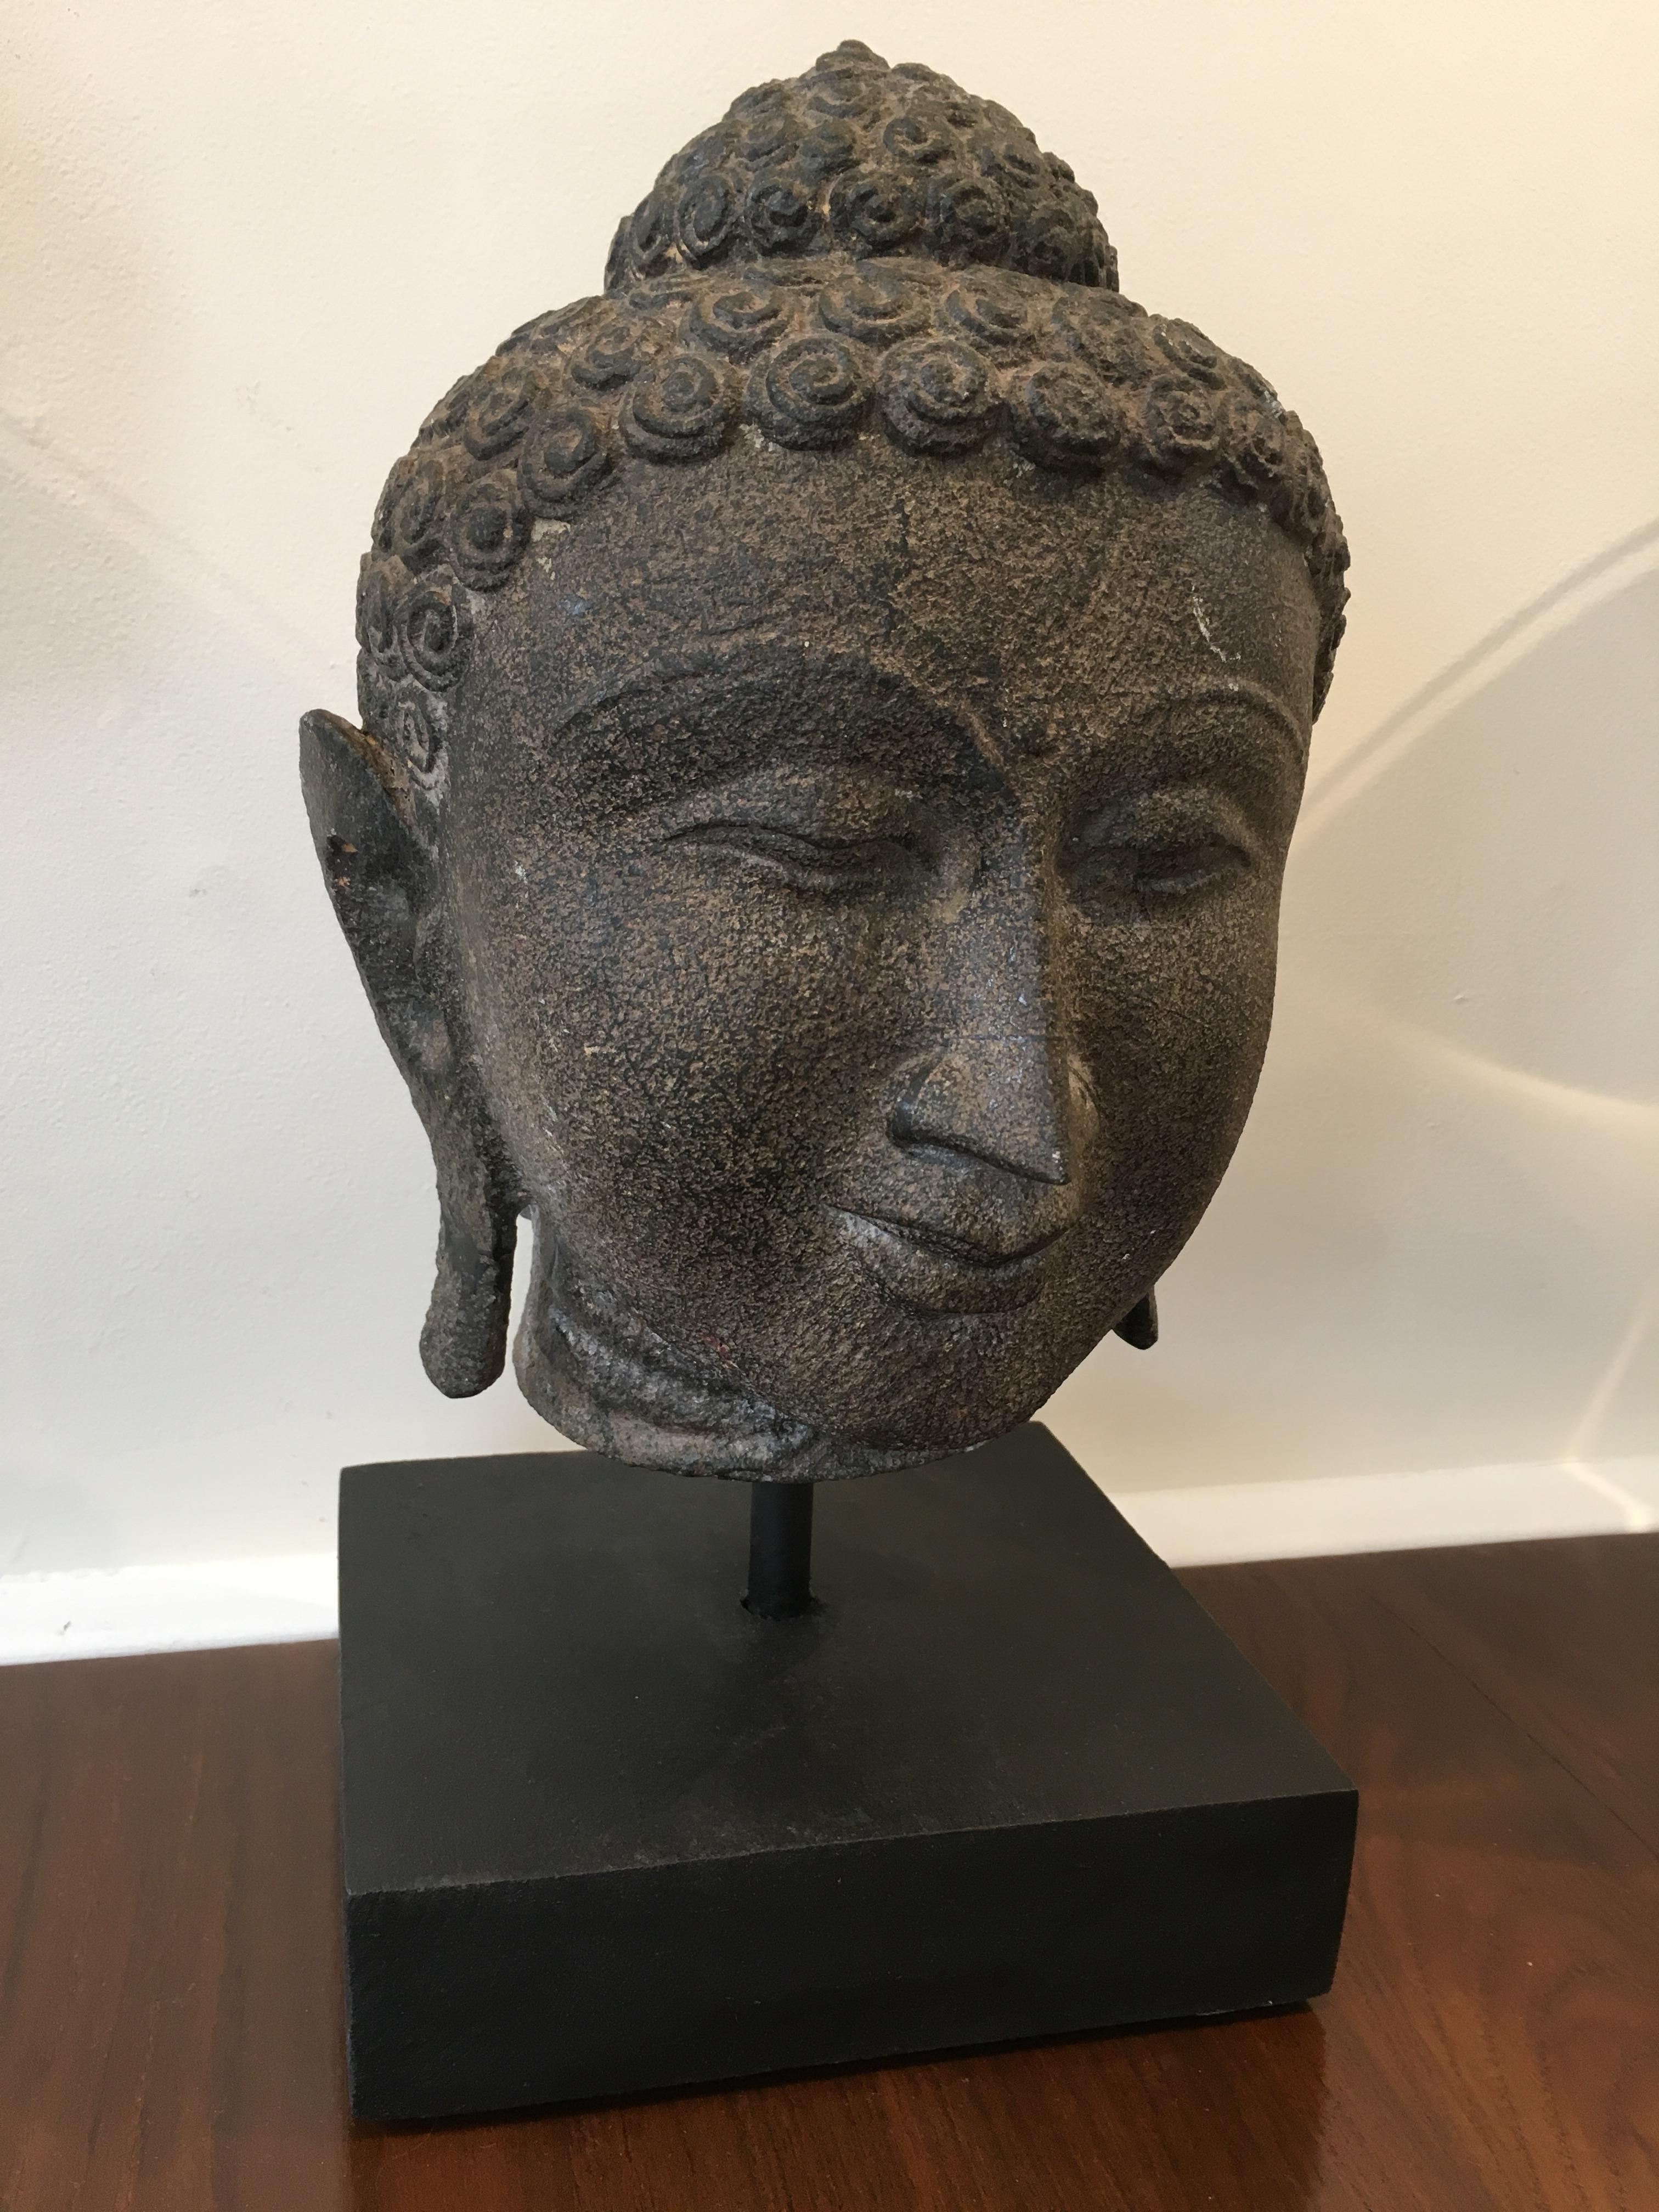 A beautiful Buddha head made of granite dating from the late 19th century. Features include the typical curled hair, elongated ears and half-closed eyes. The Ushnisha crown depicts the wisdom and illumination after attaining enlightenment. In